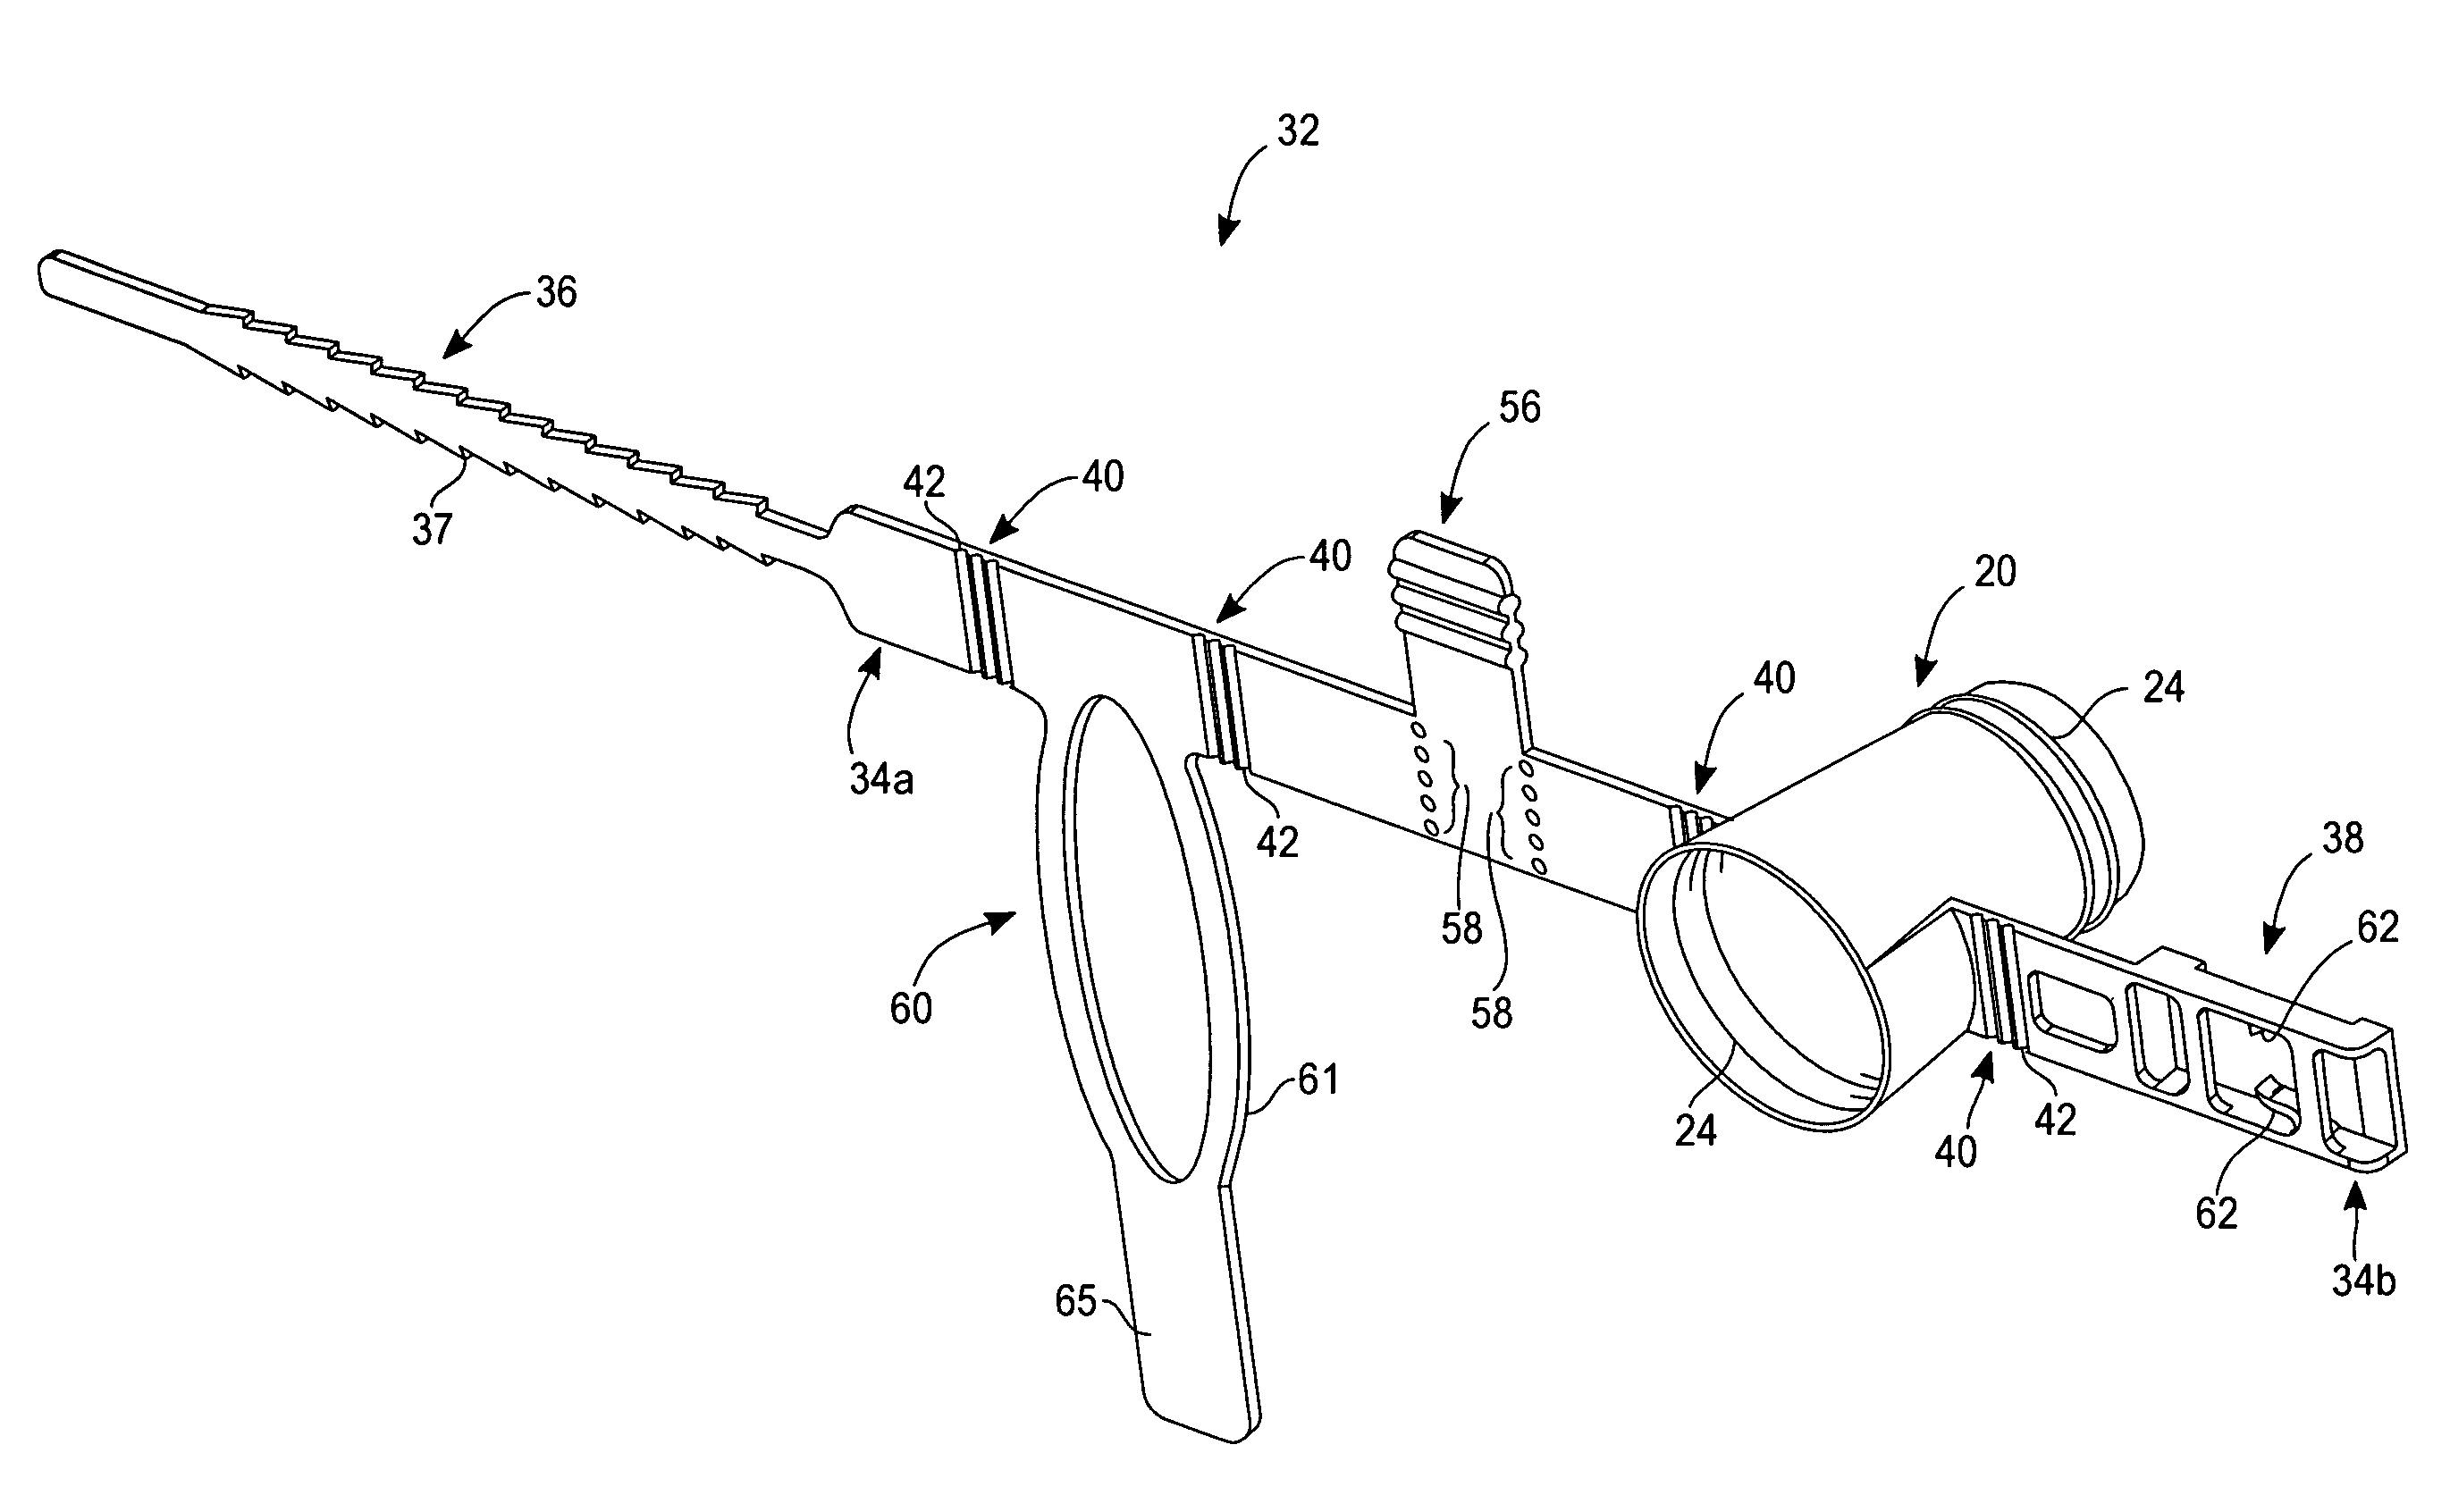 Protection and tamper notification device for use with a valve